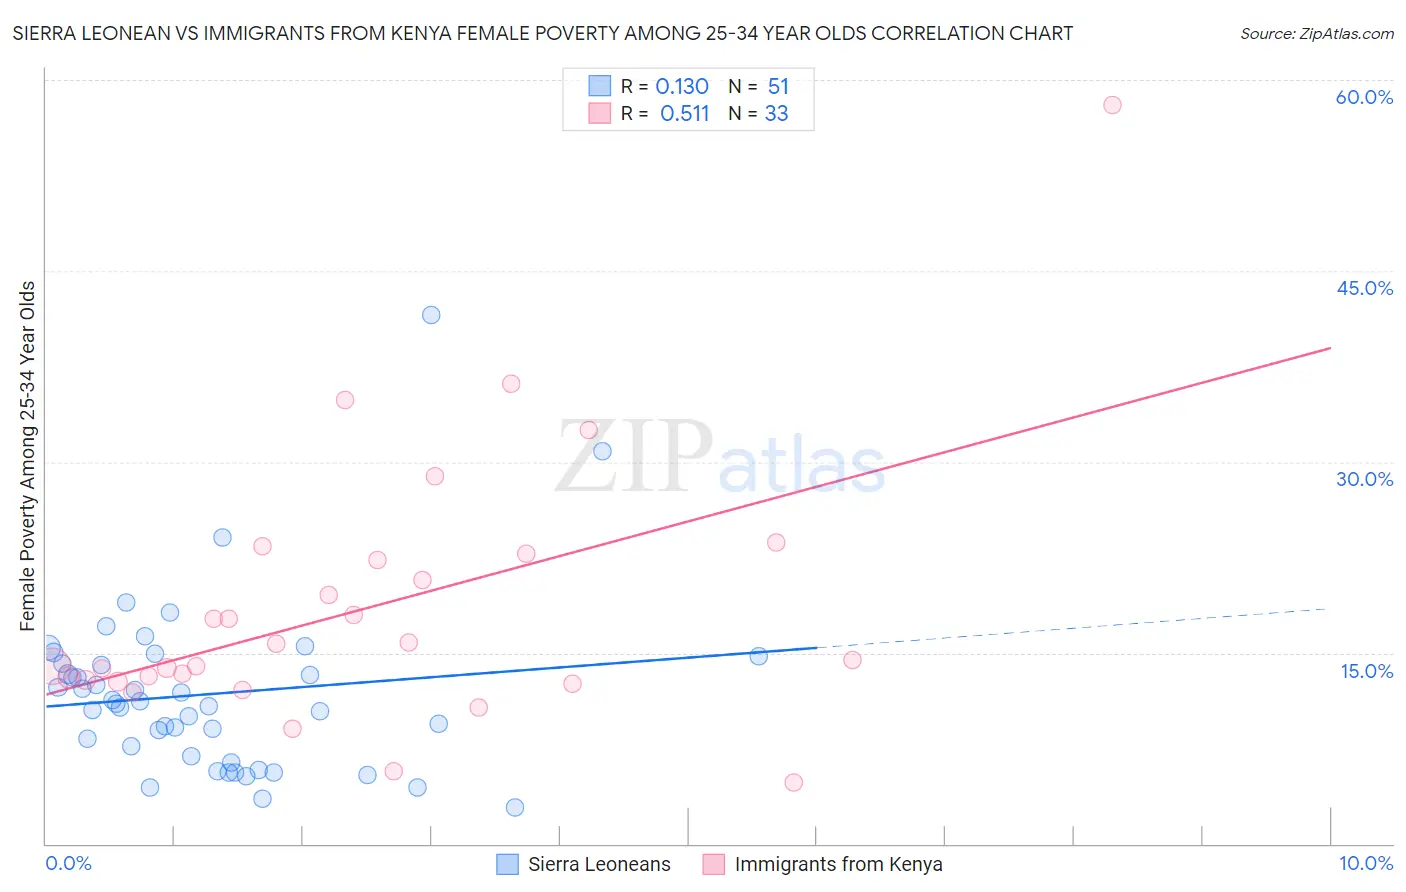 Sierra Leonean vs Immigrants from Kenya Female Poverty Among 25-34 Year Olds